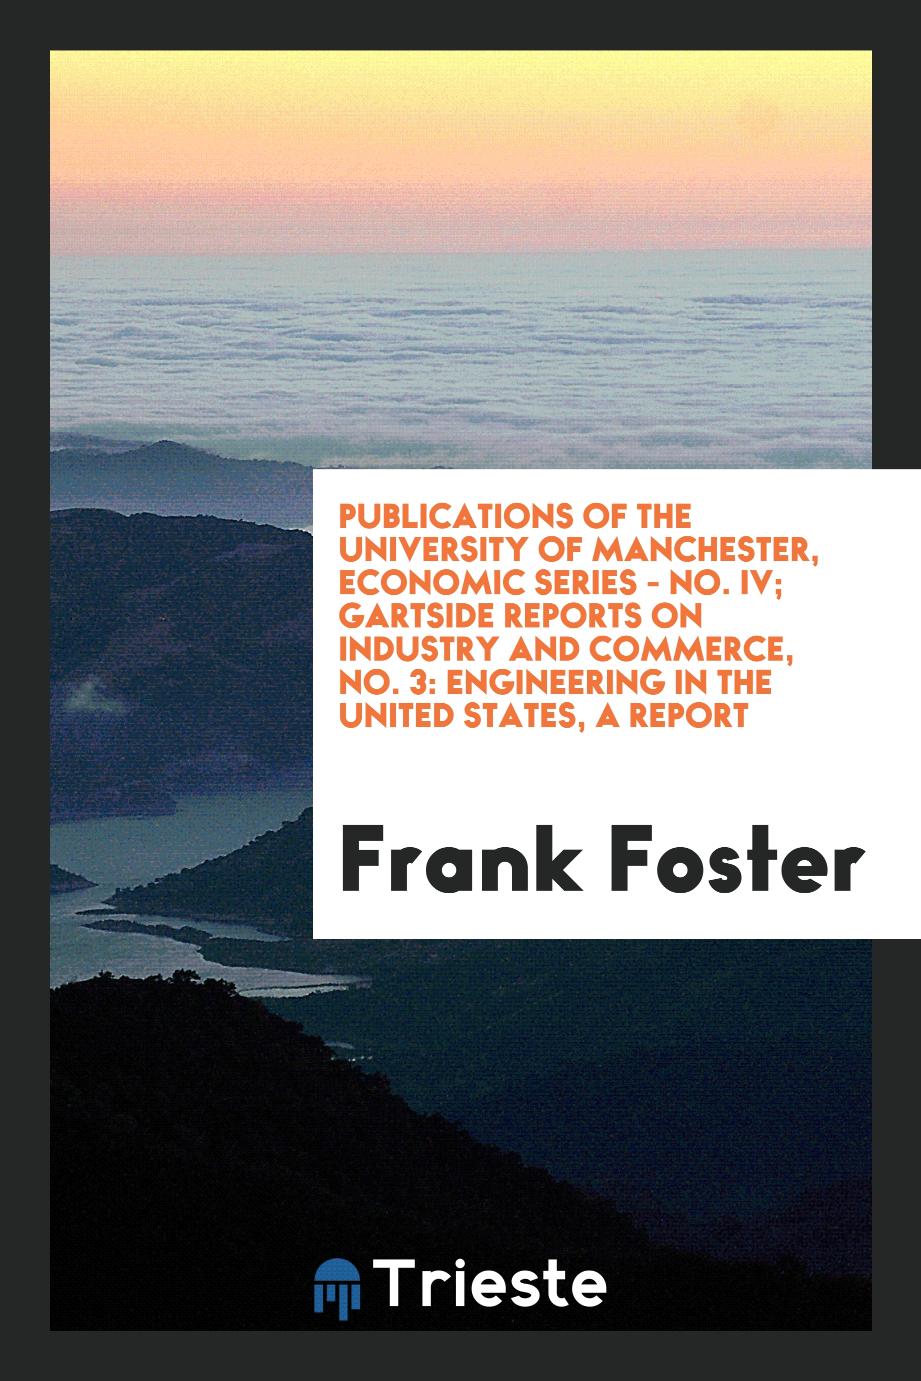 Publications of the University of Manchester, Economic Series - No. IV; Gartside Reports on Industry and Commerce, No. 3: Engineering in the United States, a Report